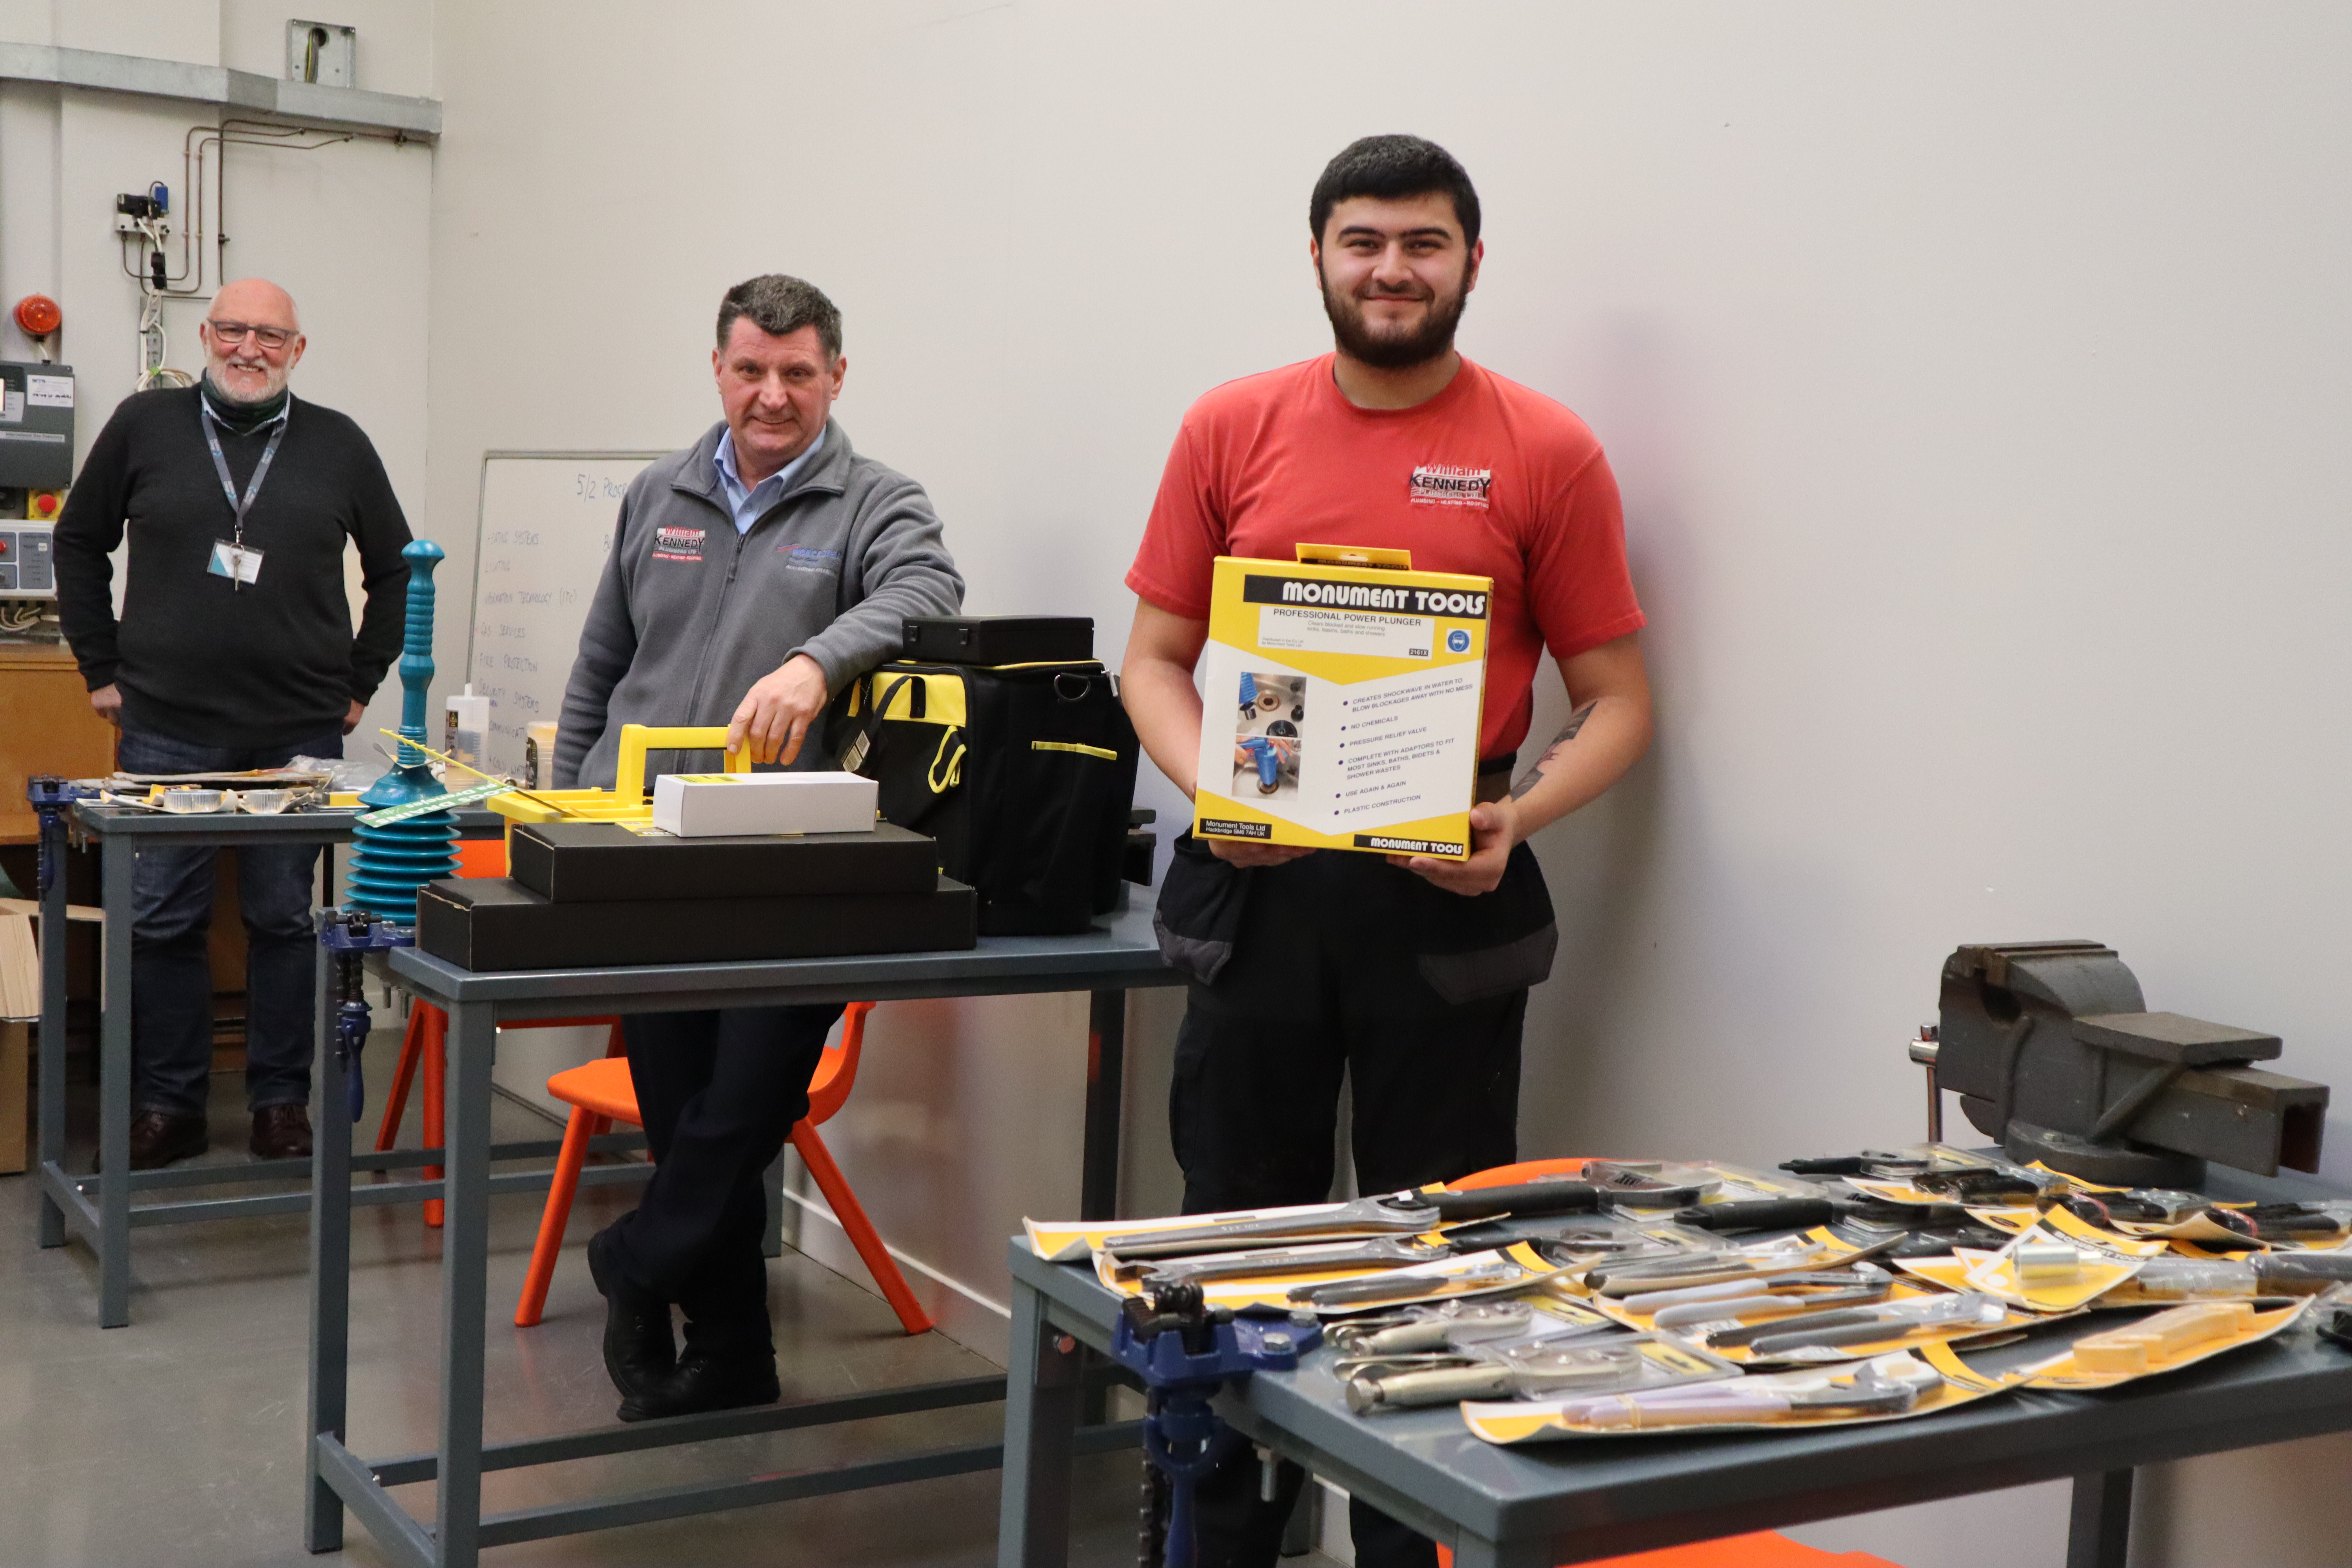 Plumbing apprentice has all the tools for success